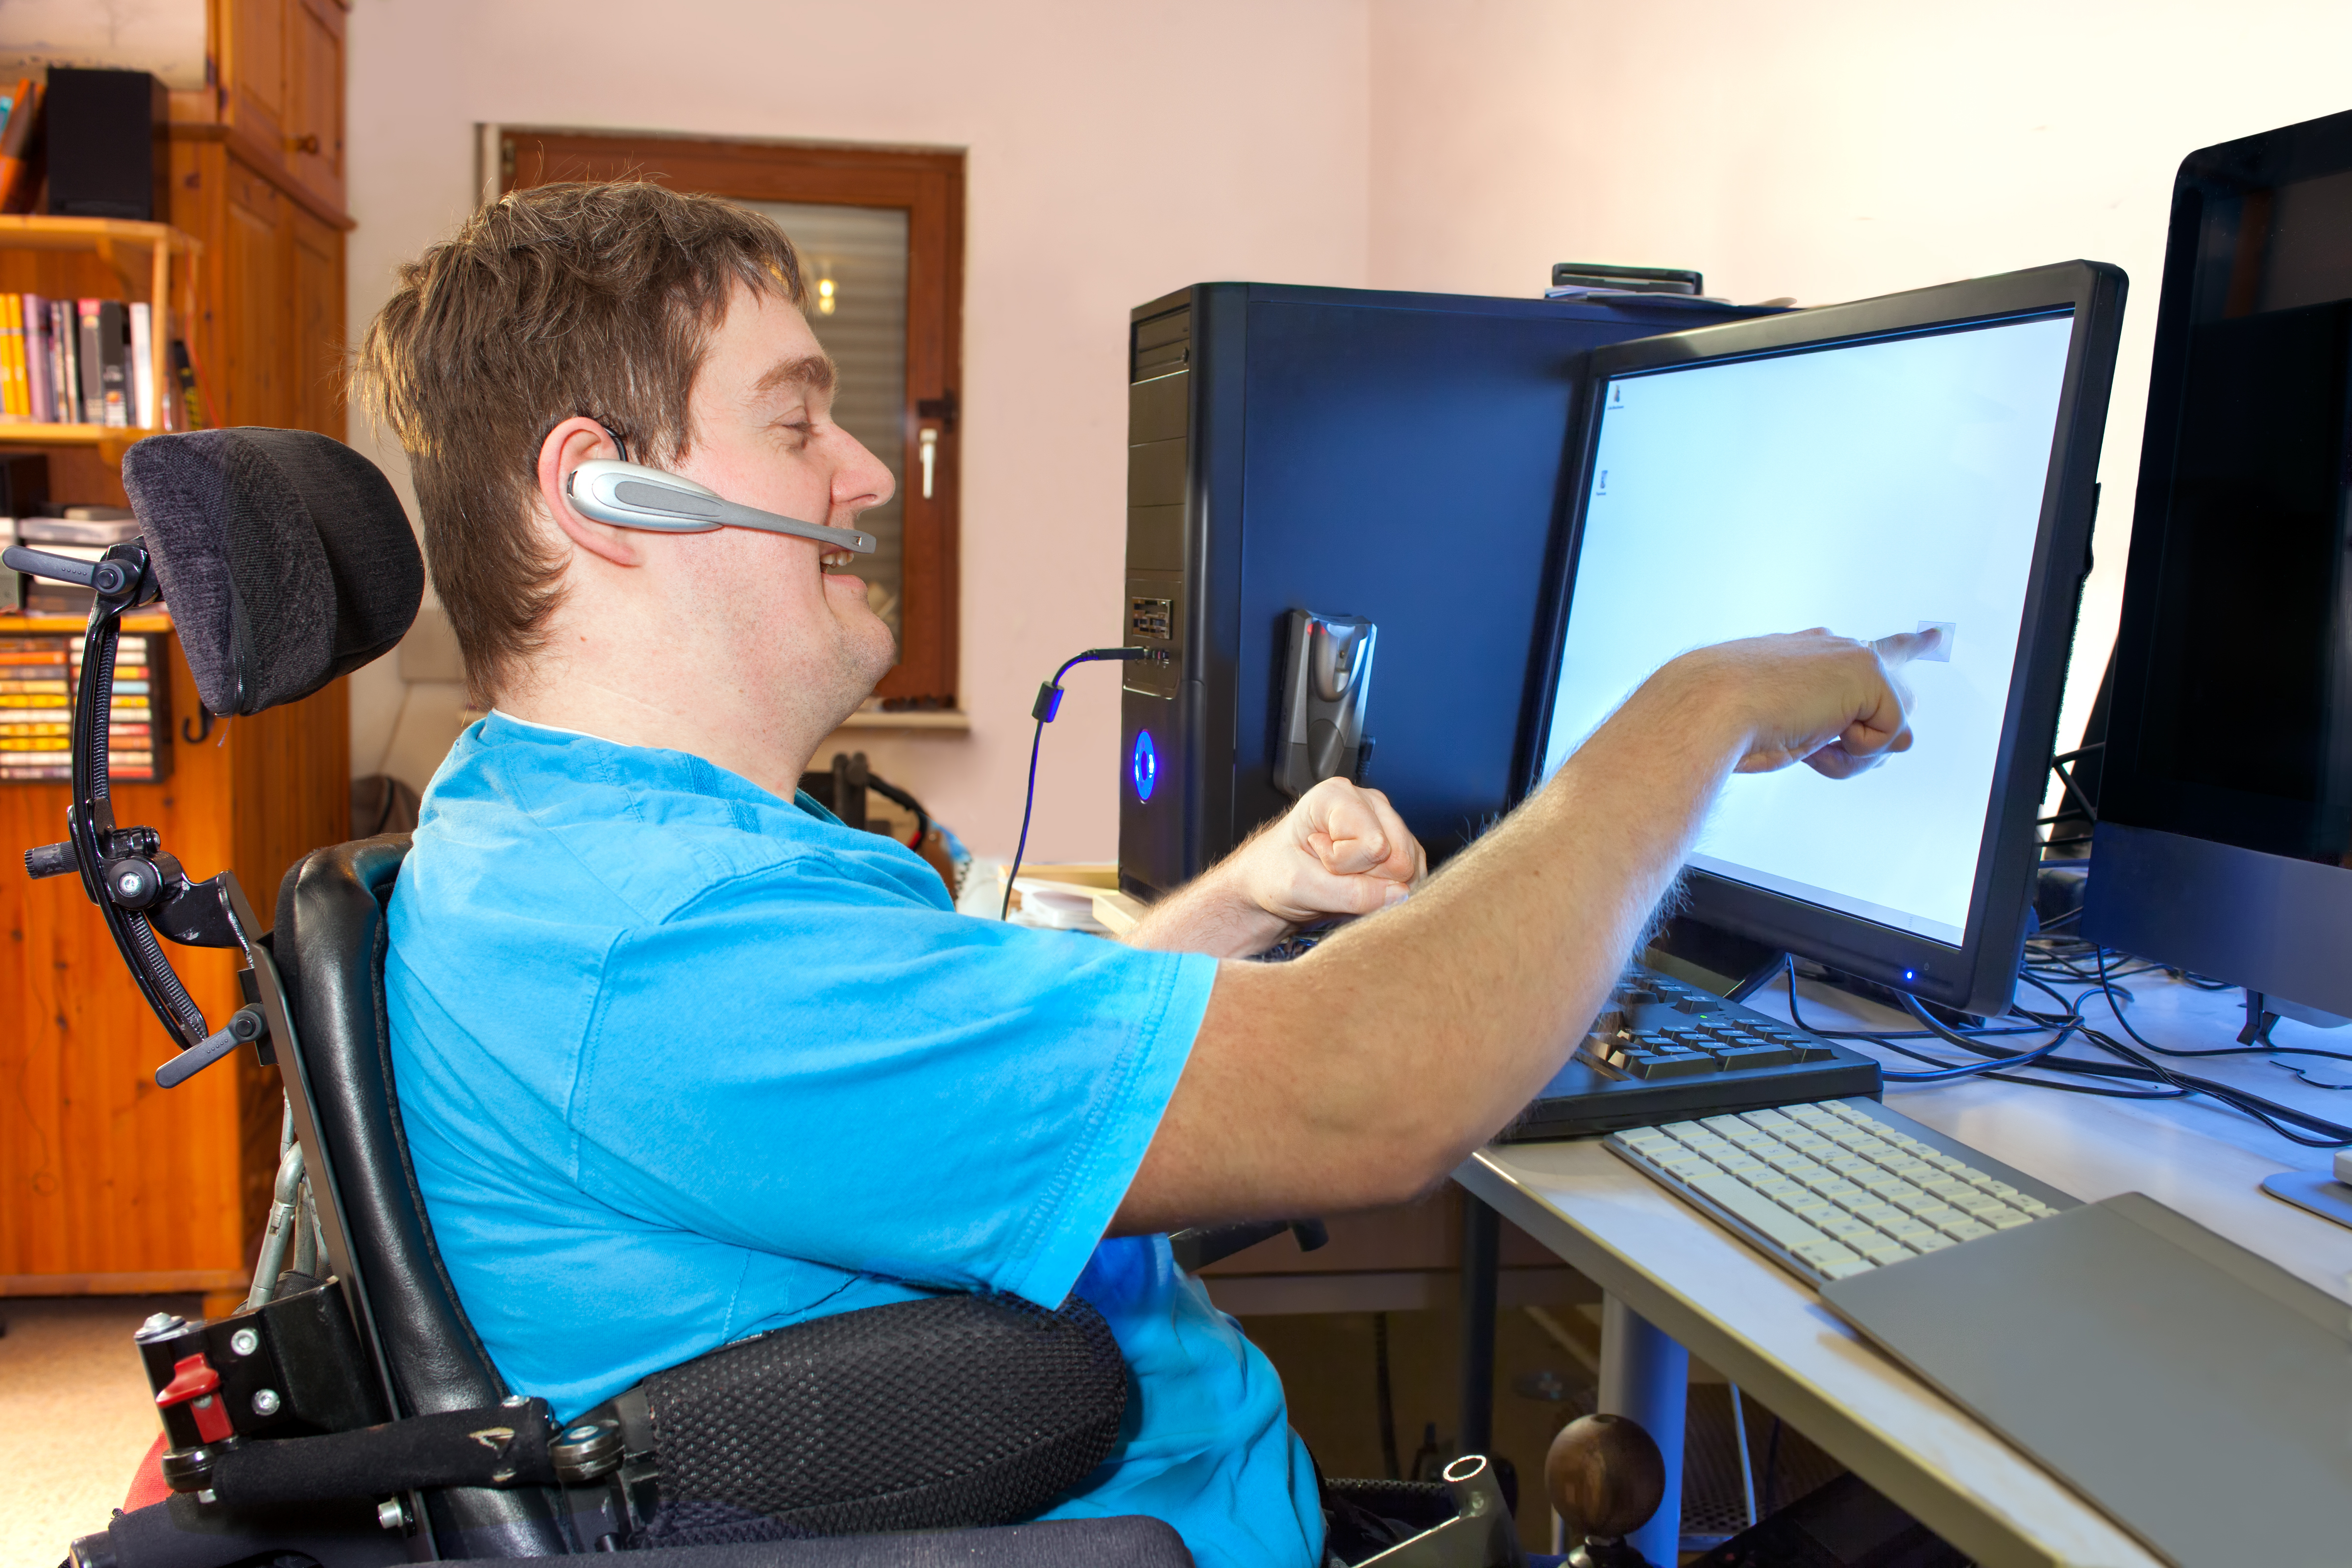 Image - a person with a disability; on a wheelchair; interacting with the computer in front of him.